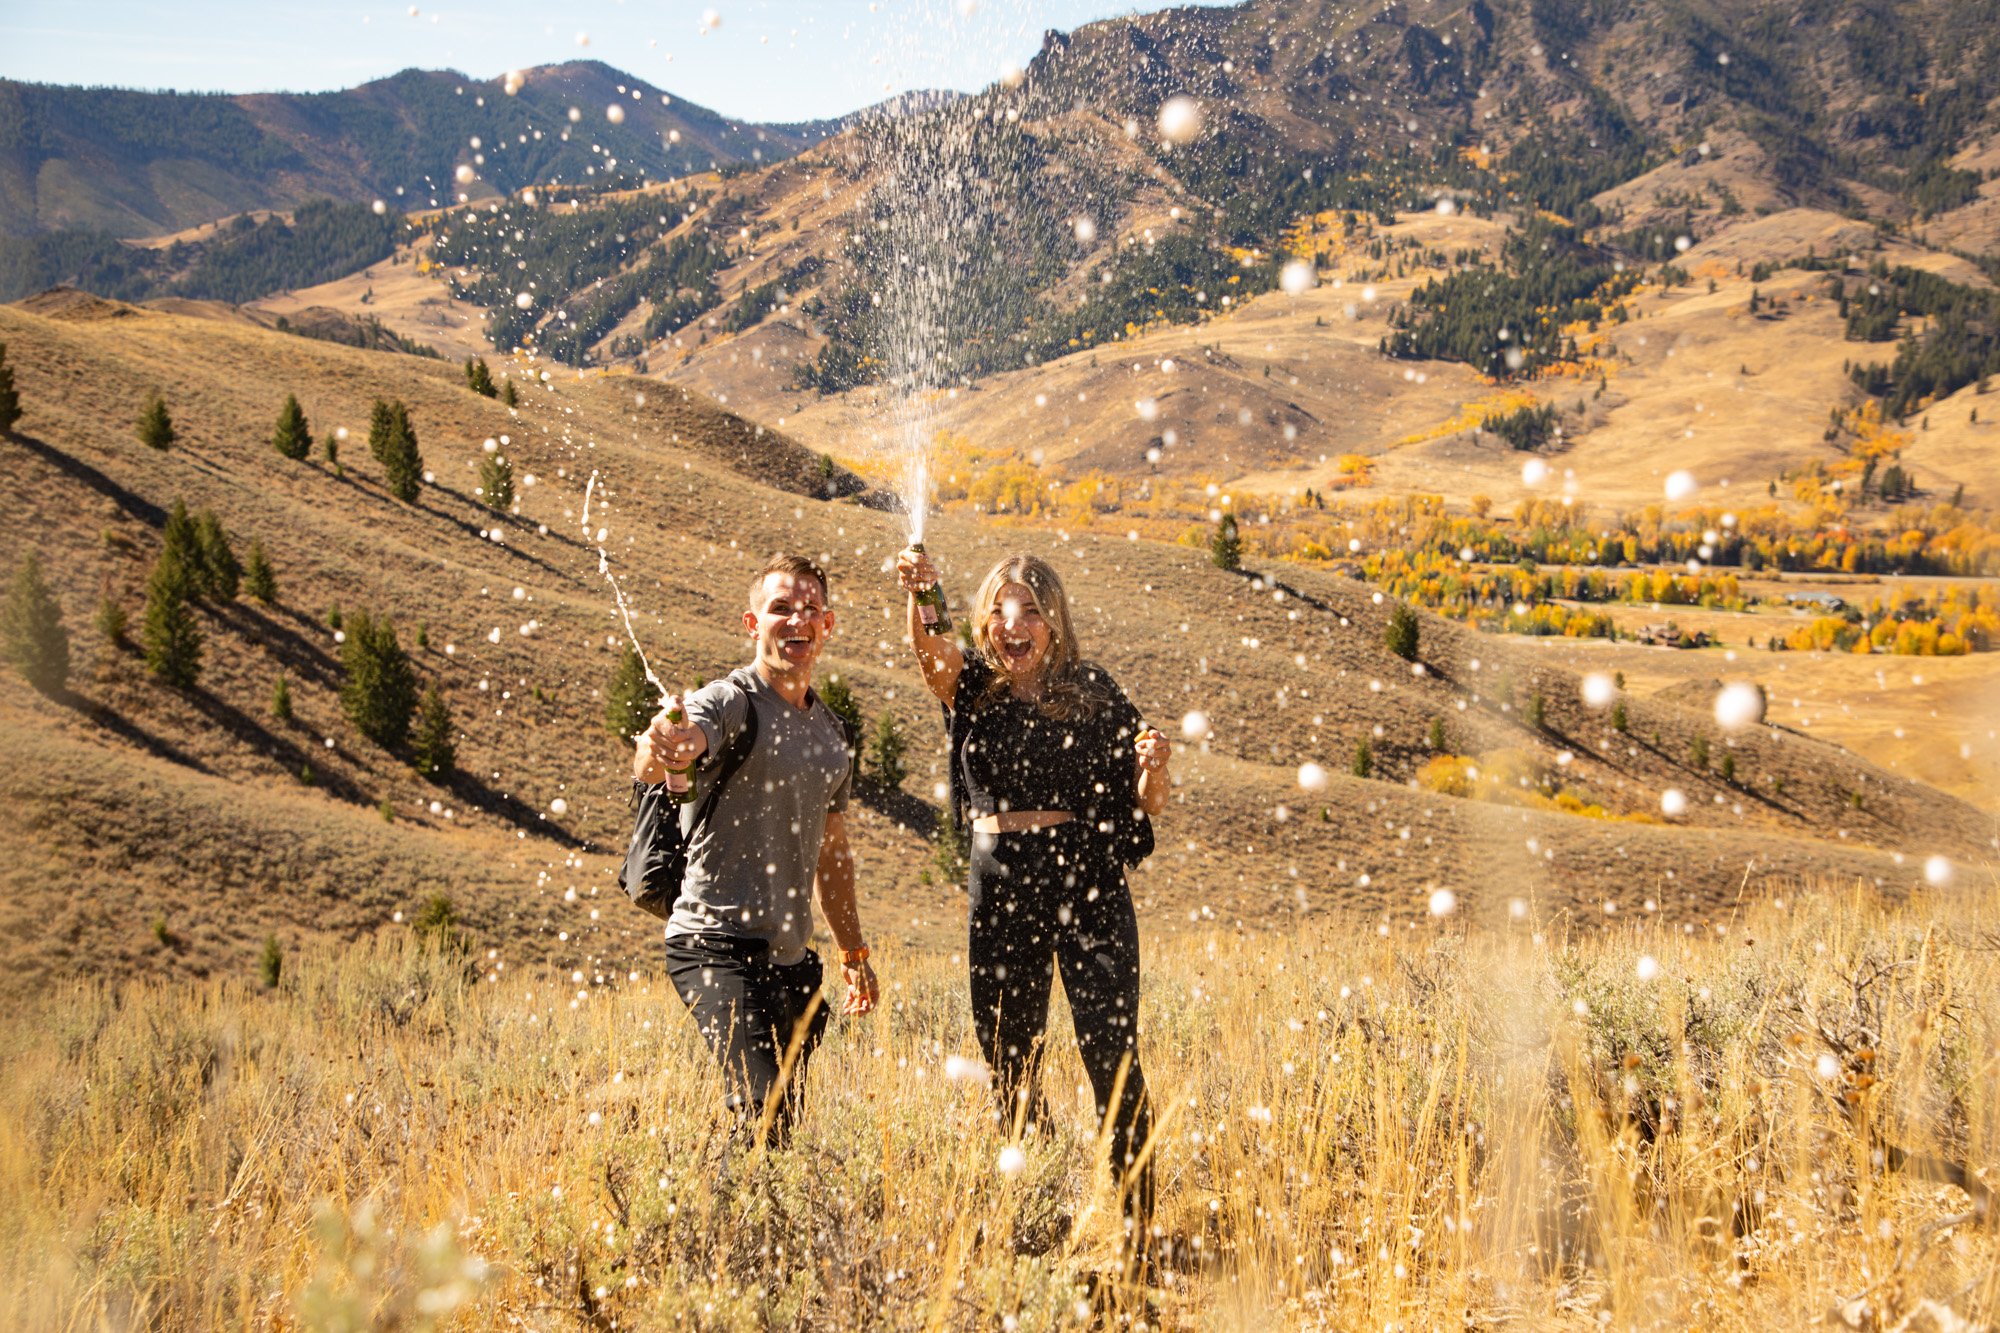 Gabe and Athena’s mountaintop proposal in Ketchum, Idaho